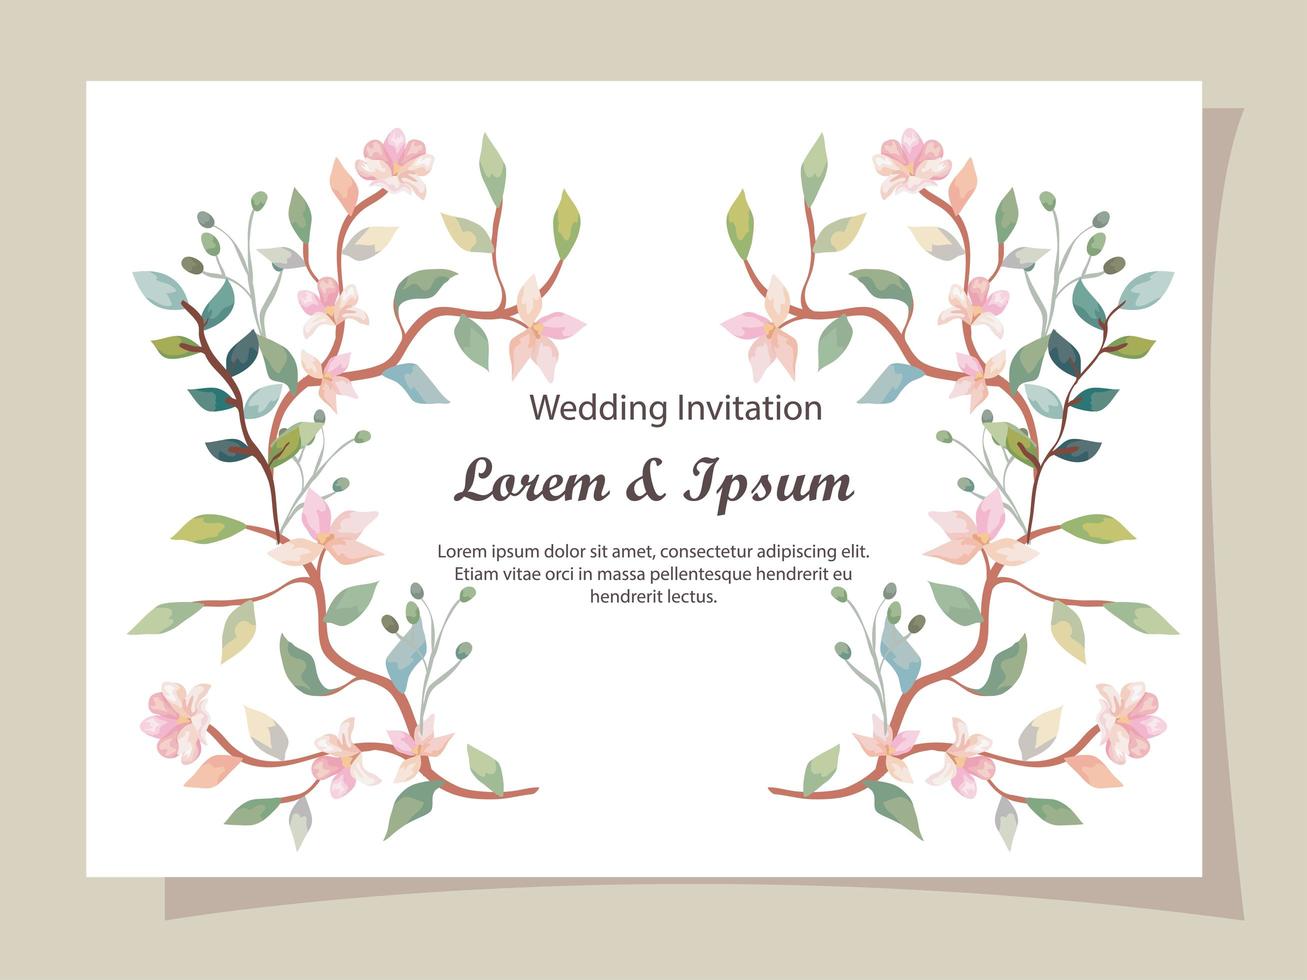 wedding invitation card with branches and flowers decoration vector